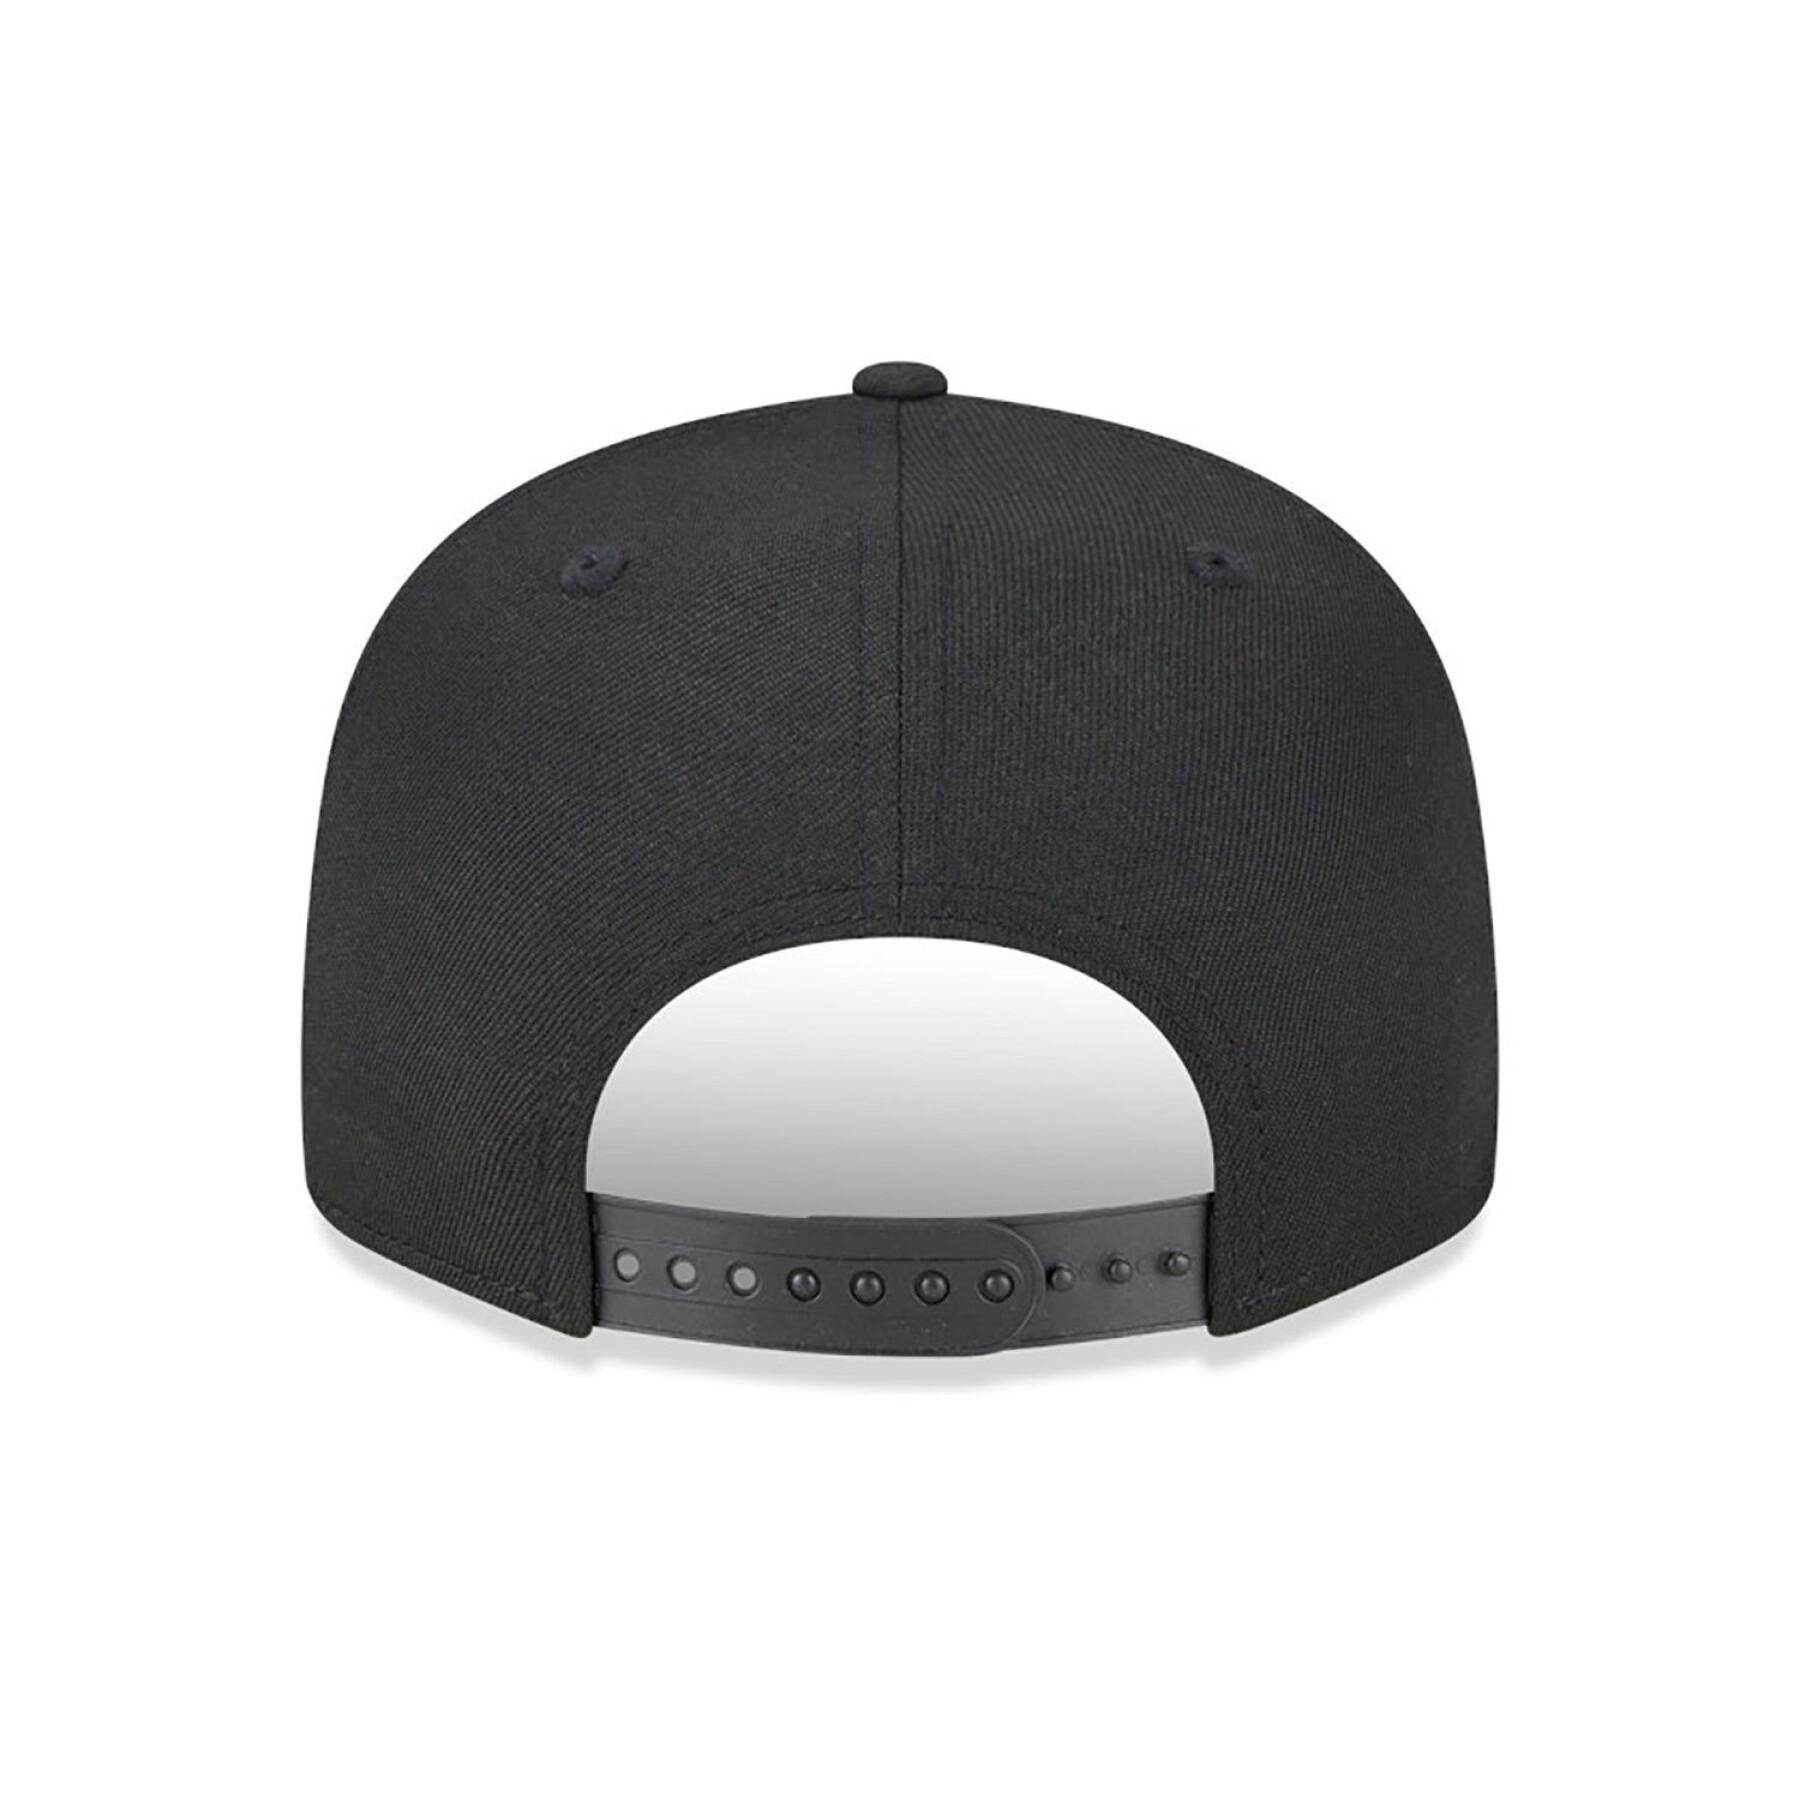 Casquette snapback Chicago Bulls 9Fifty